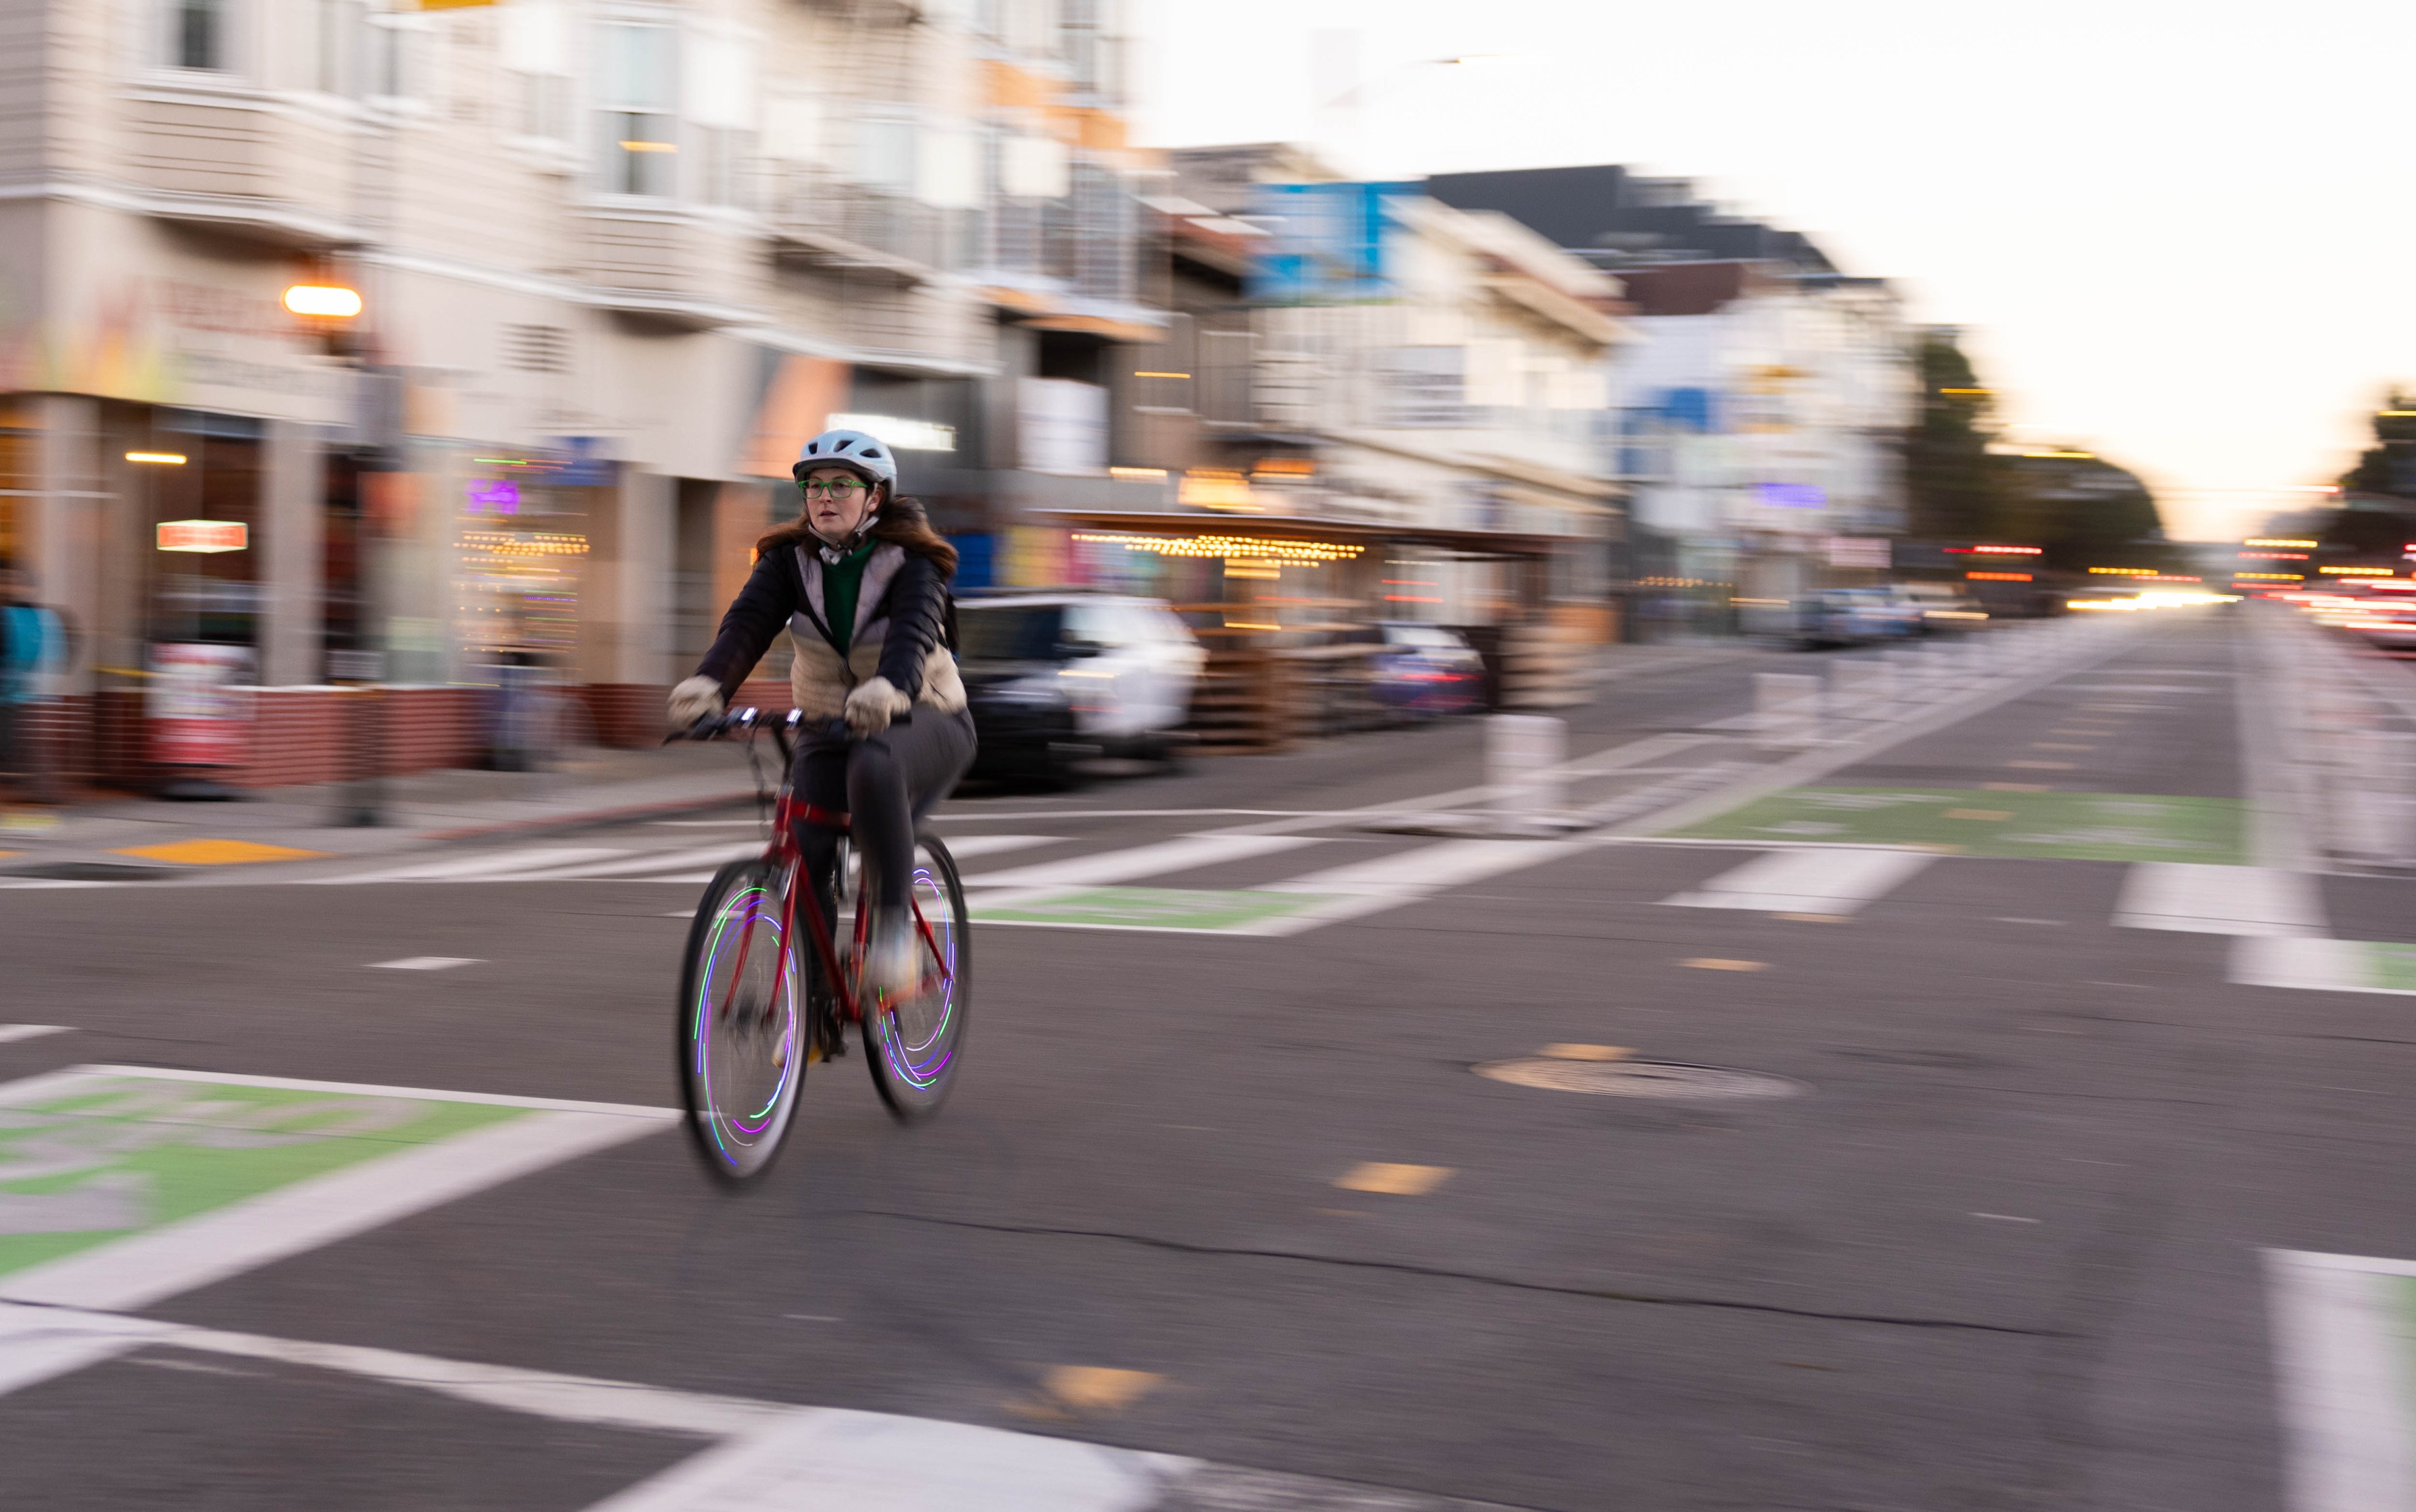 A person cycling on a city street at dusk, motion blur emphasizes their movement.